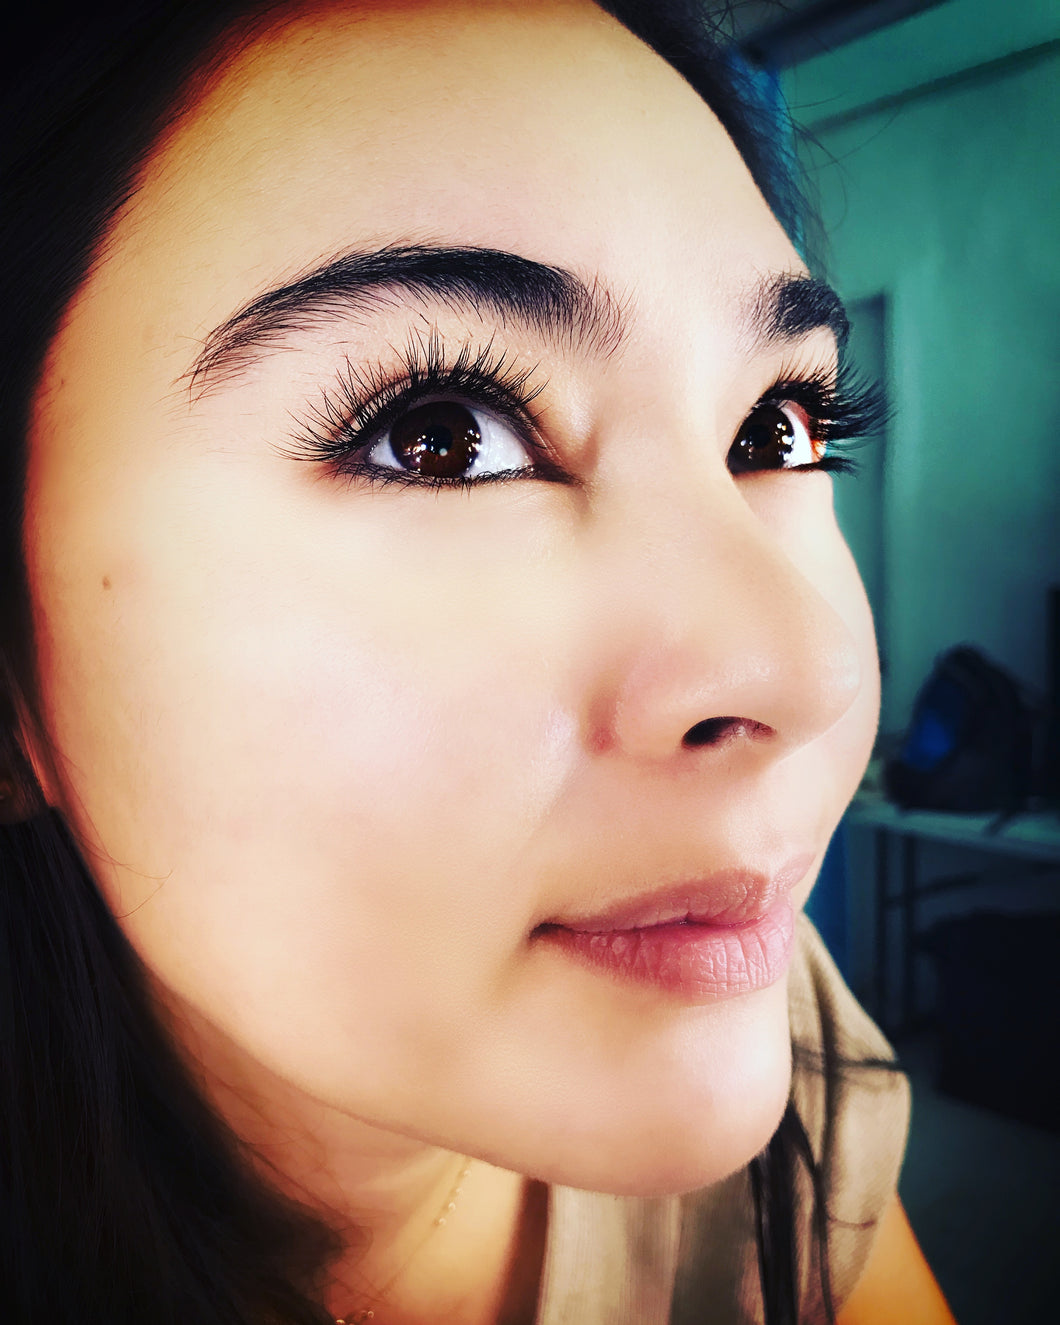 Service 6 - Eyelash Extensions (Classic 50 lashes)